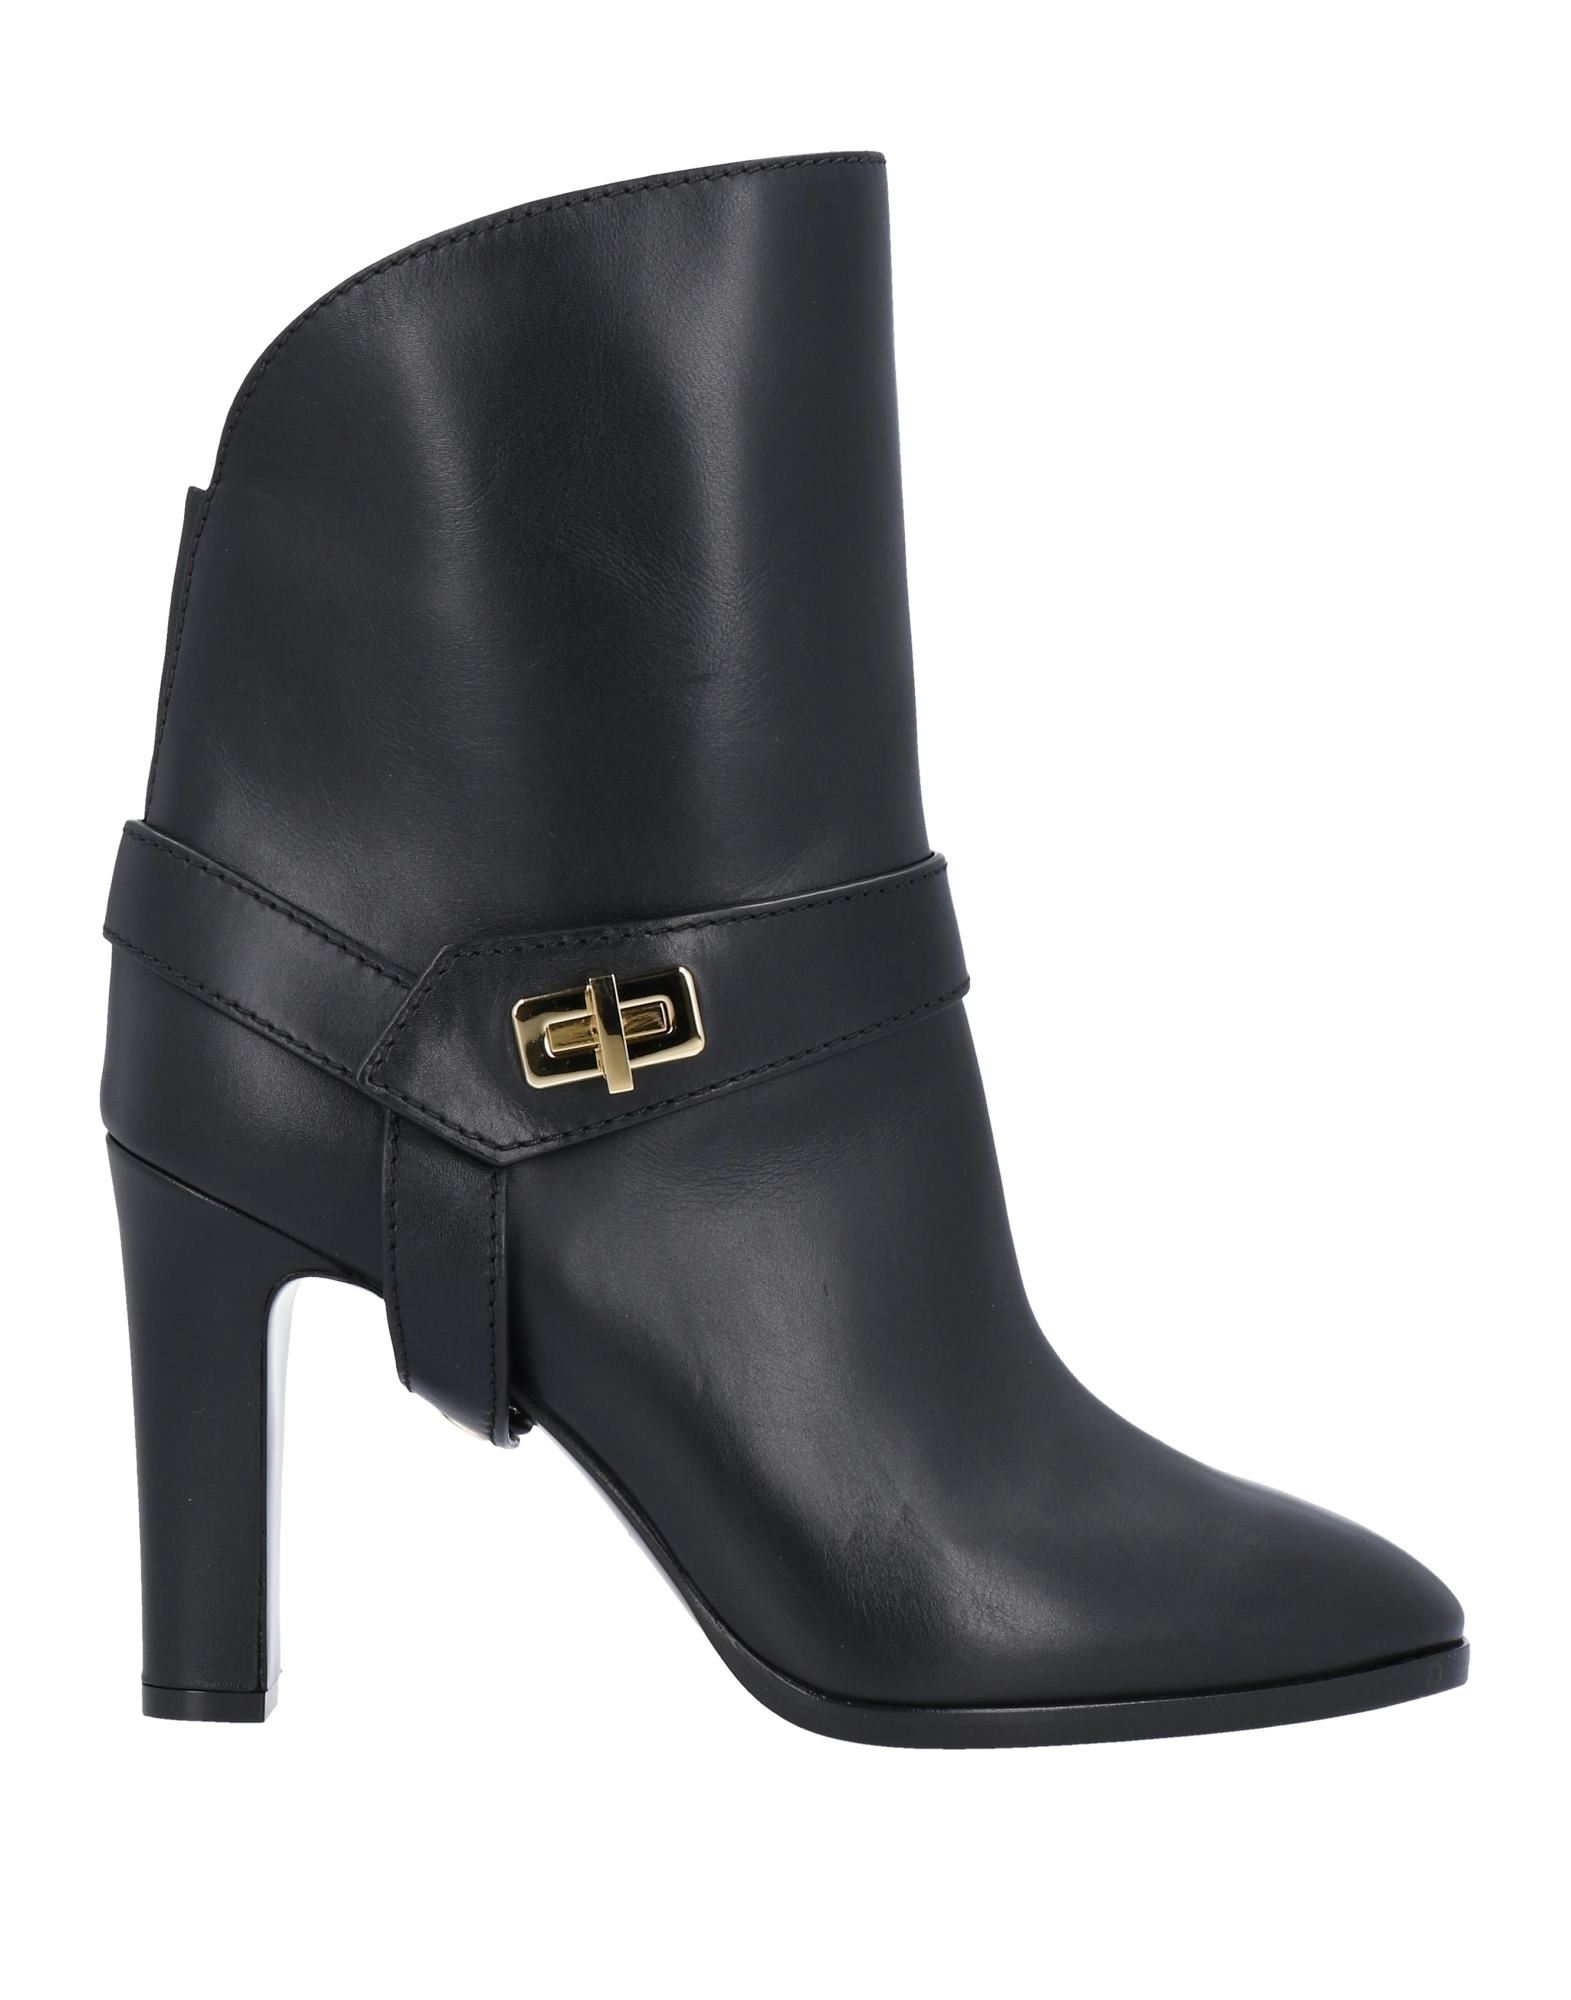 Shop Givenchy Woman Ankle Boots Black Size 6 Calfskin